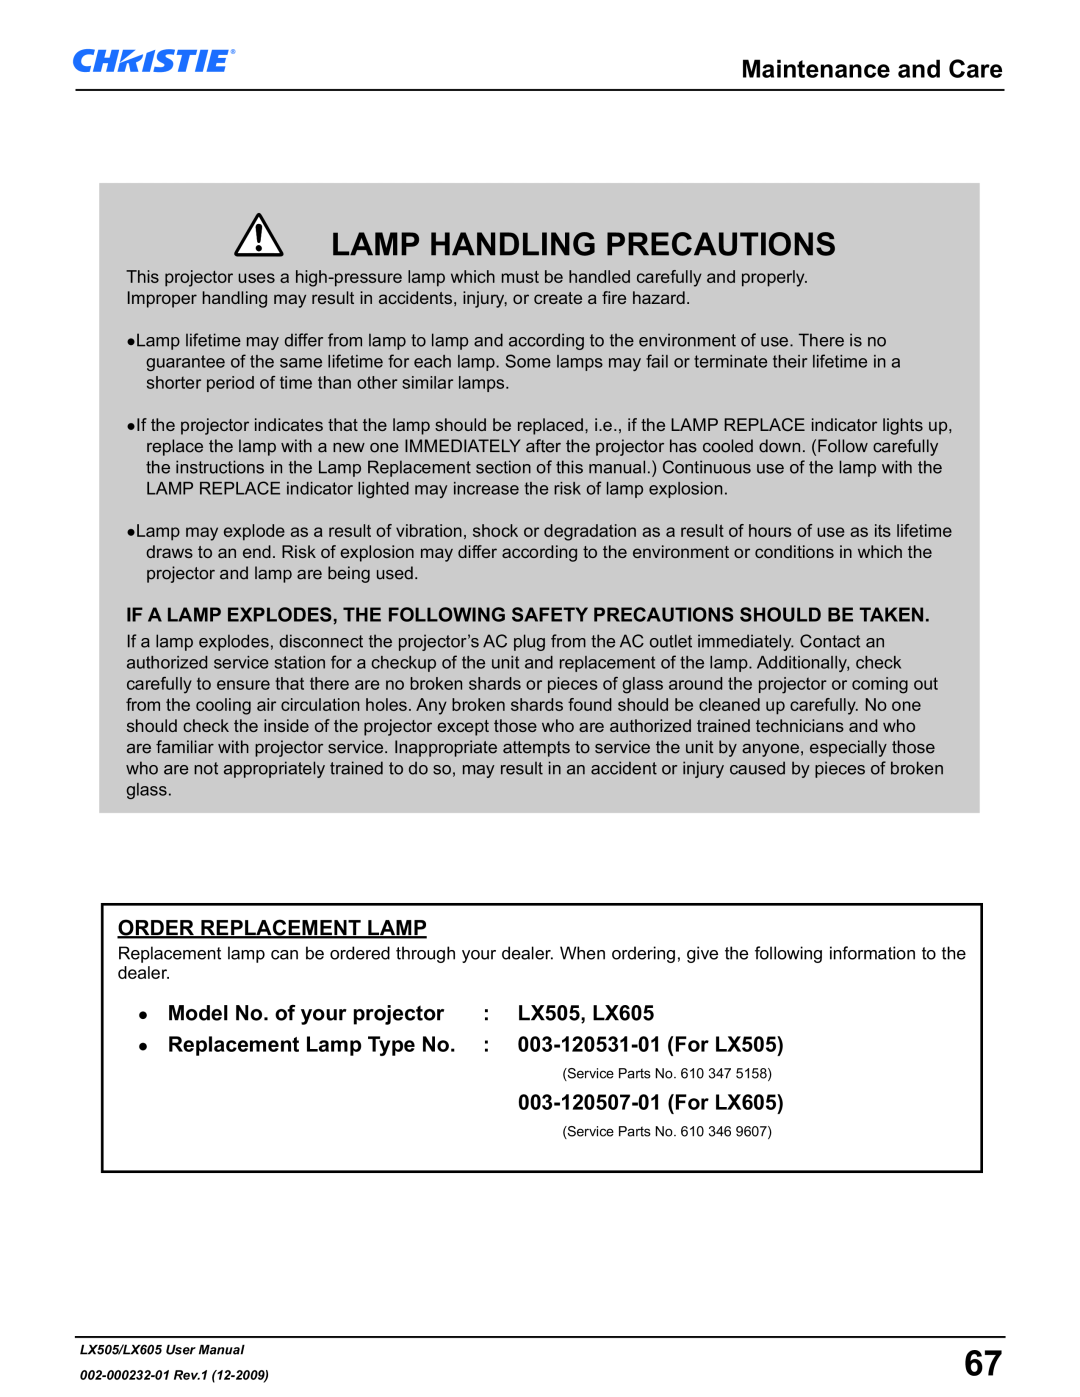 Christie Digital Systems LX605 manual Maintenance and Care, Lamp Handling Precautions 